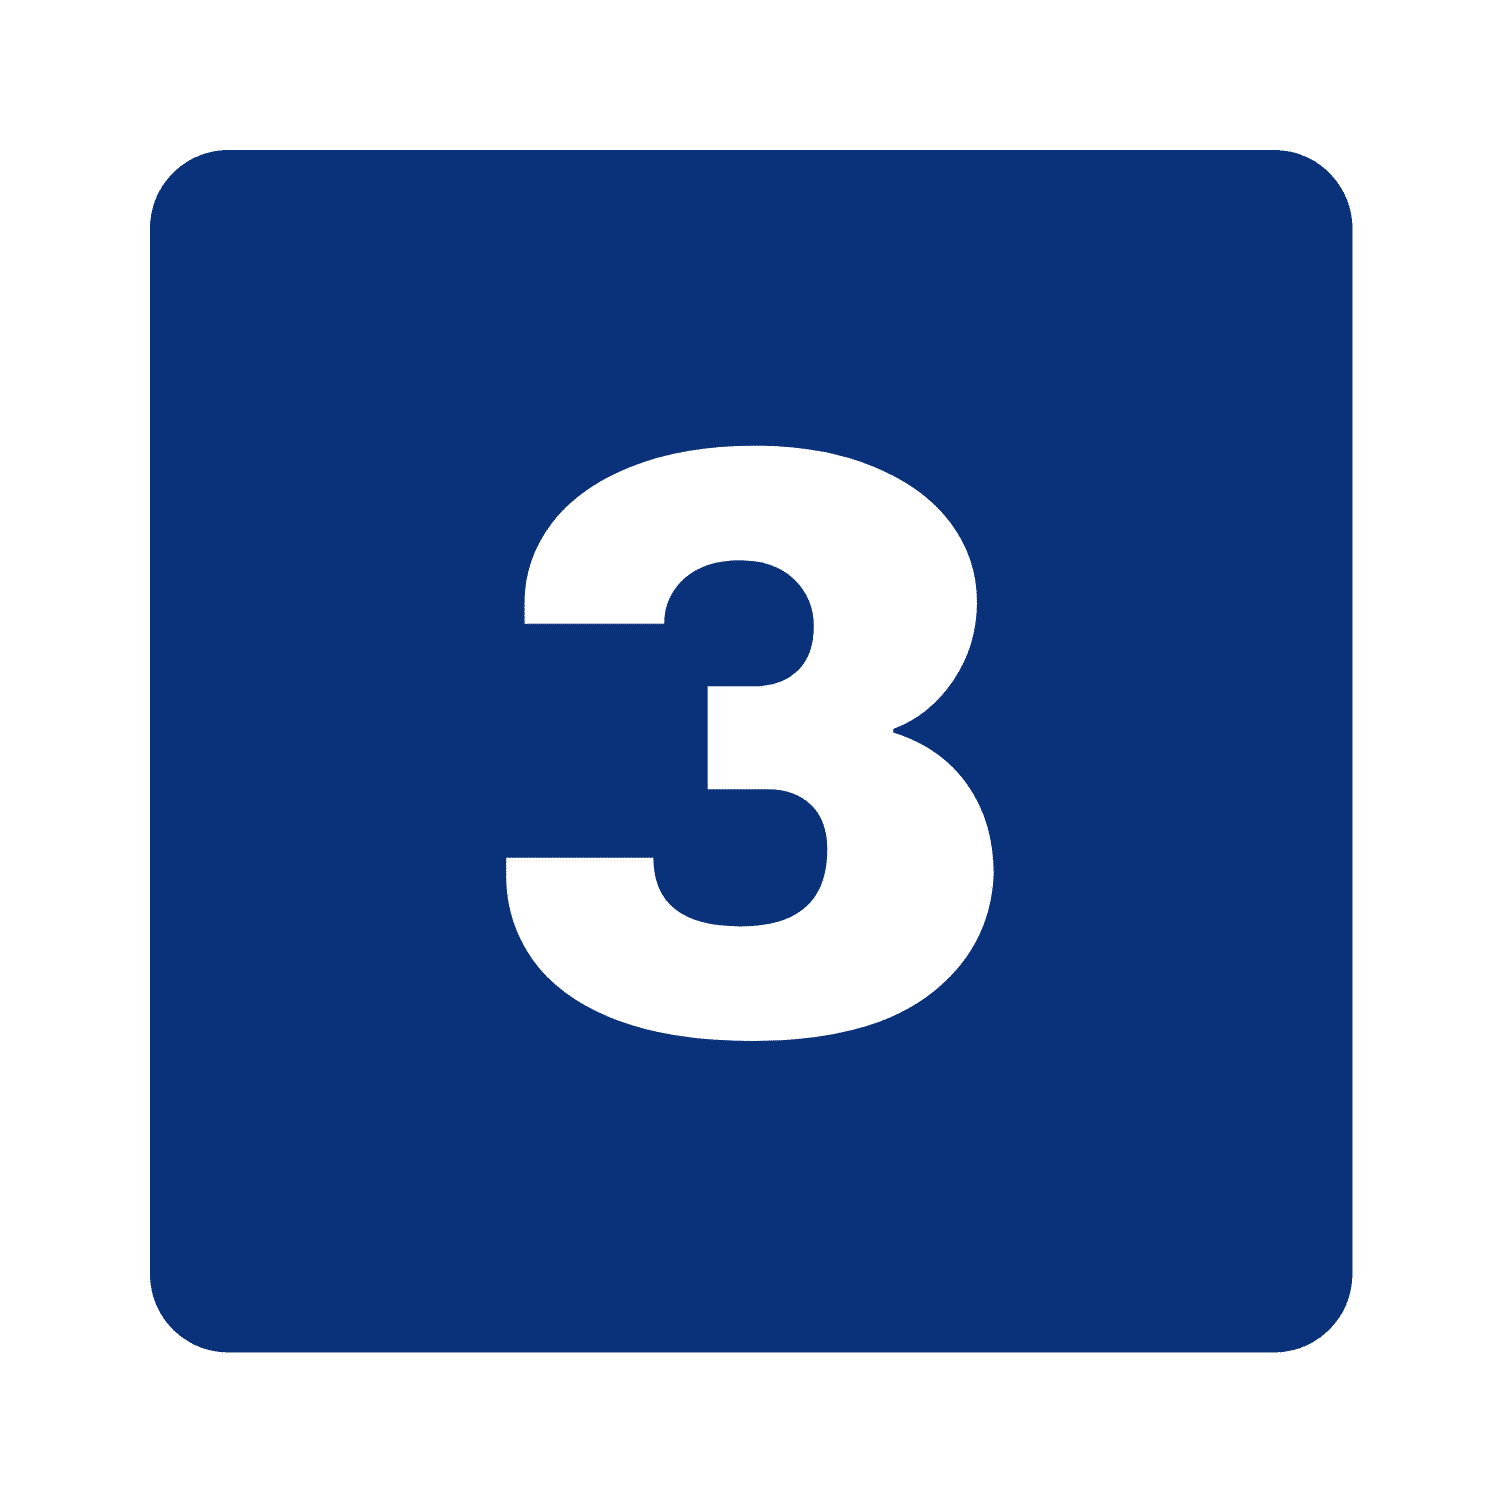 Icon of a number 3 against blue square background